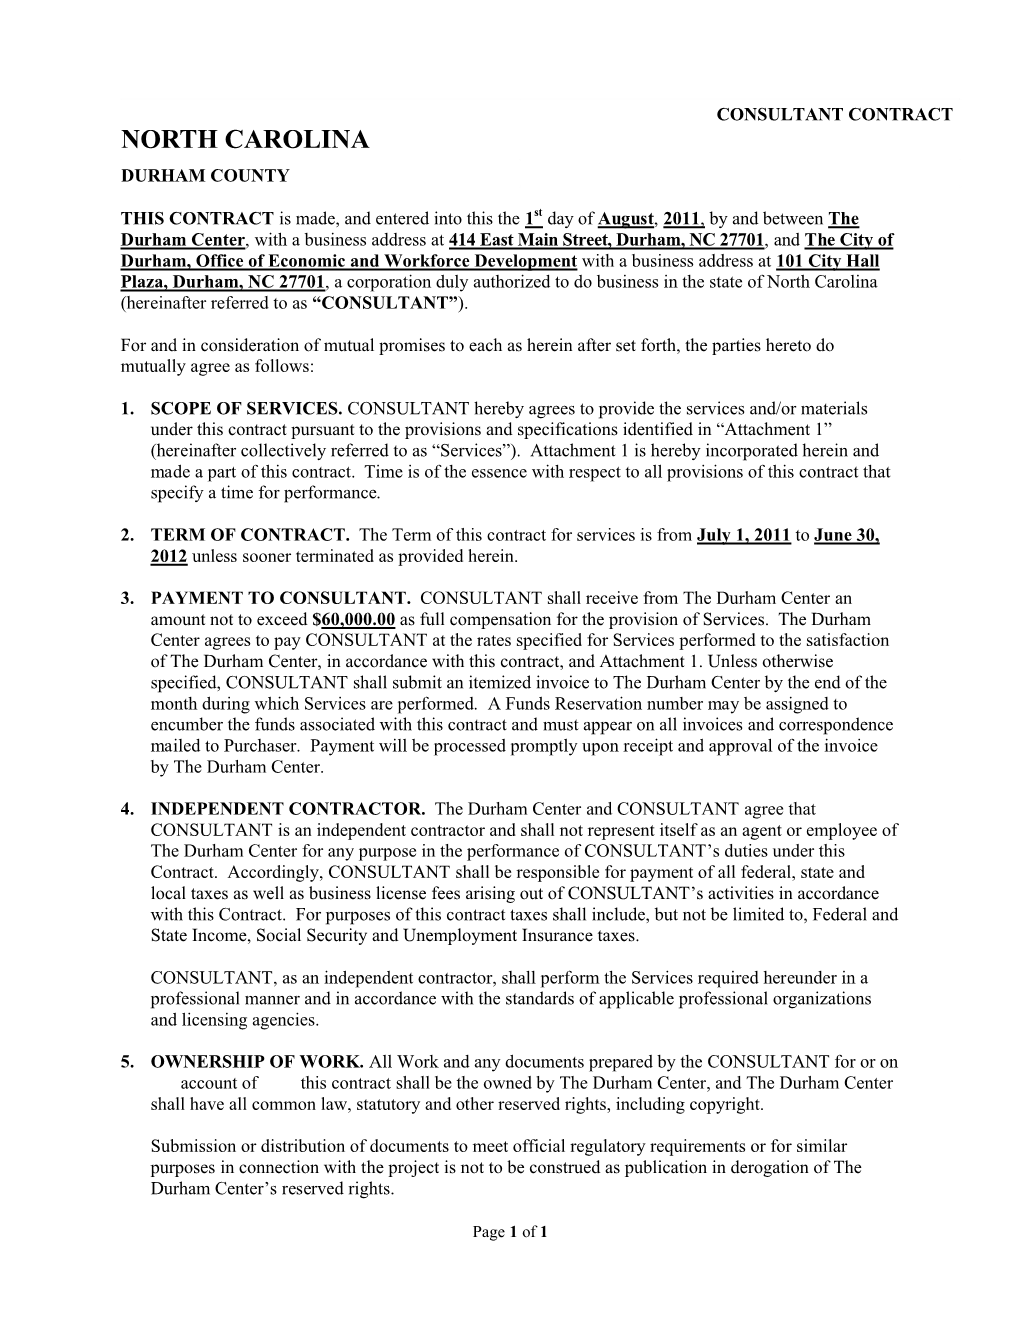 WIA Contract Between the City of Durham and Community